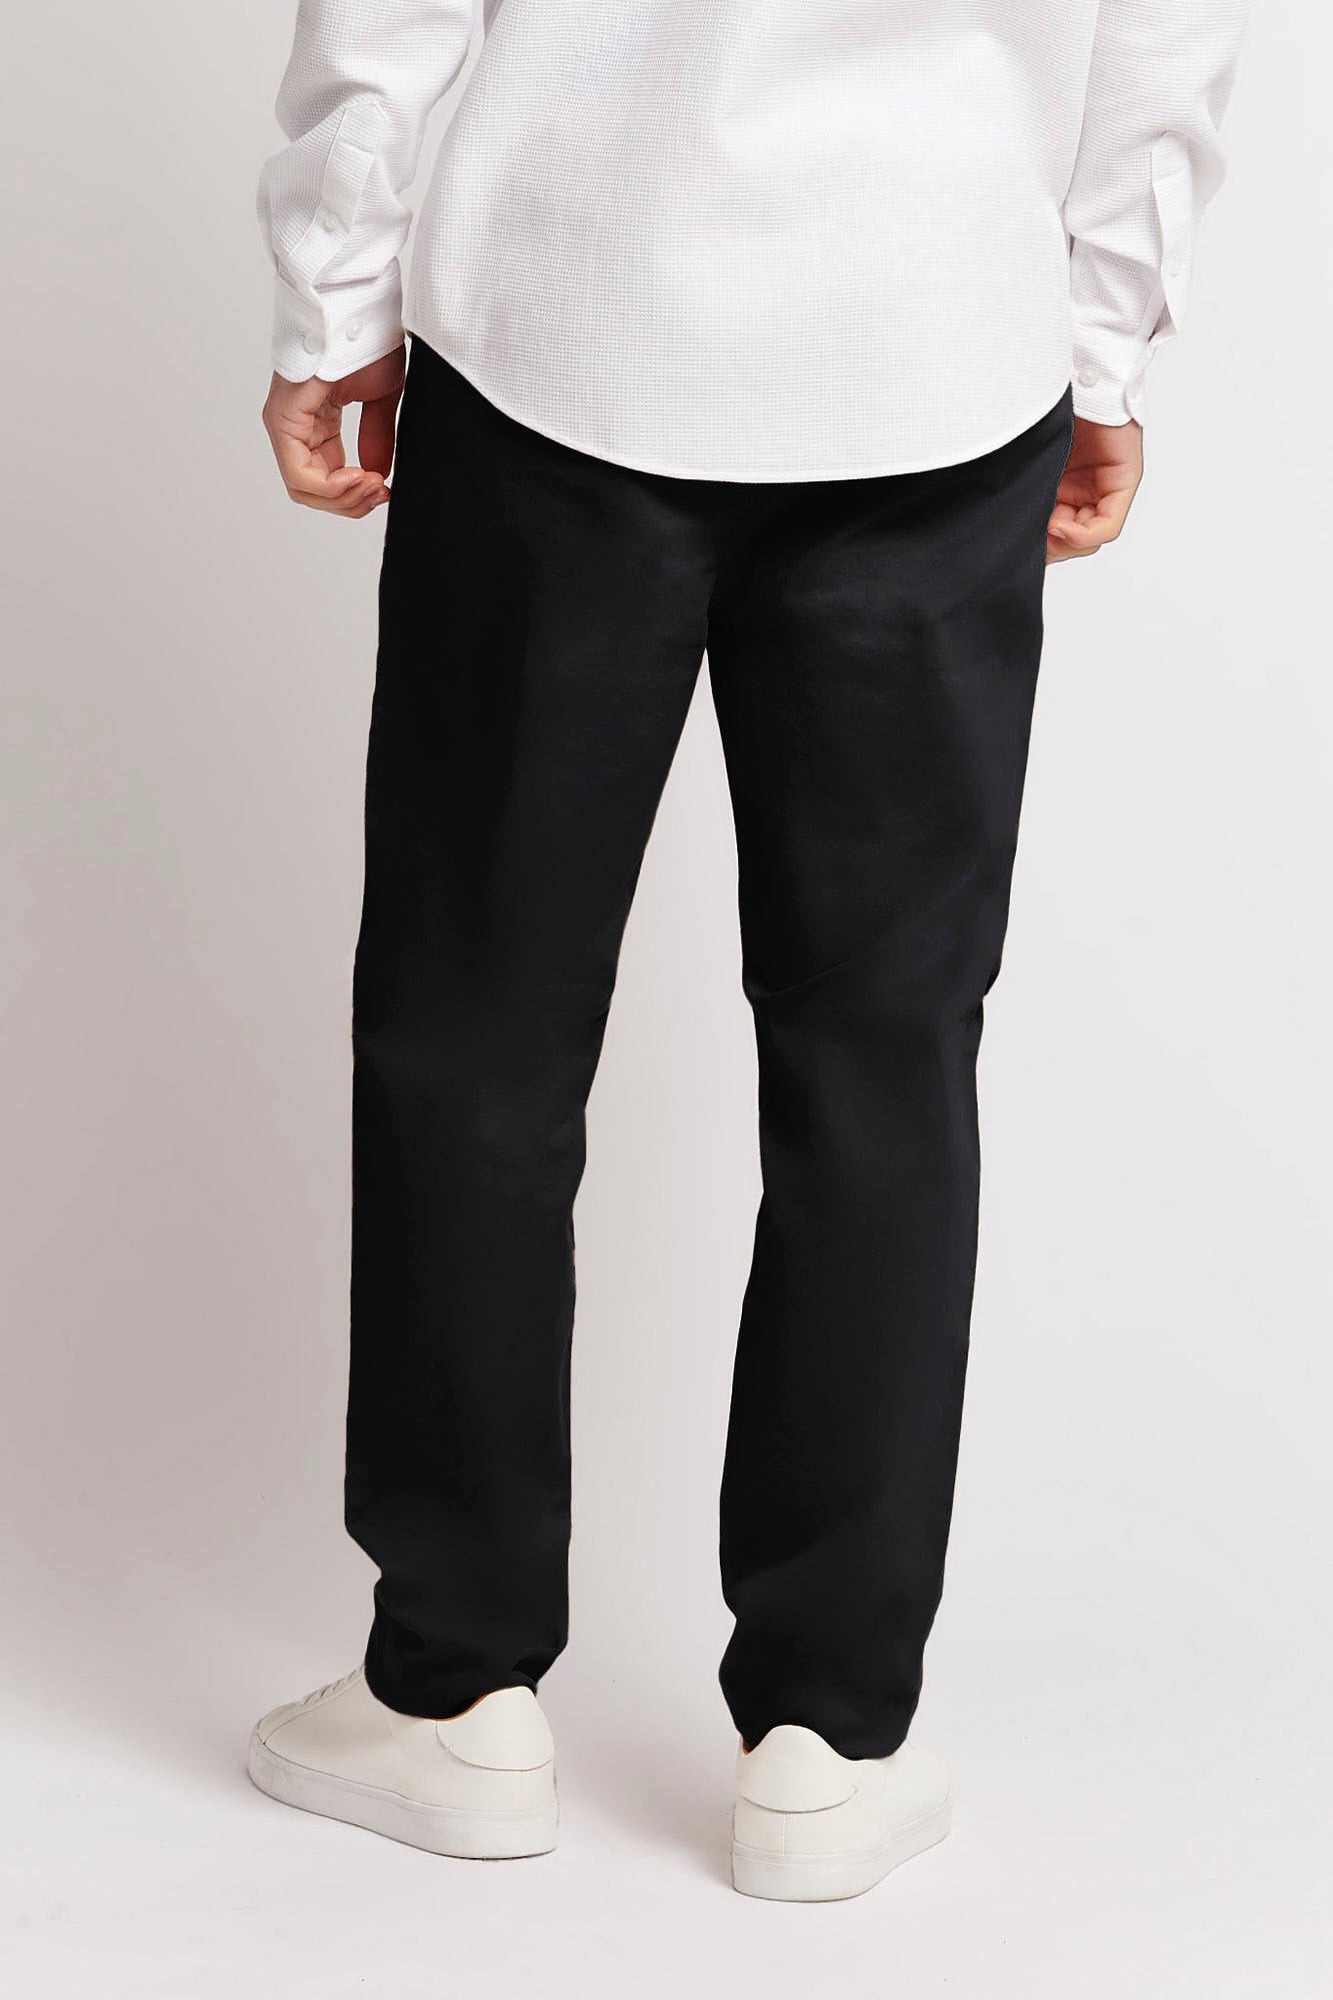 Mens Drawstring Waist Casual Trousers in Black